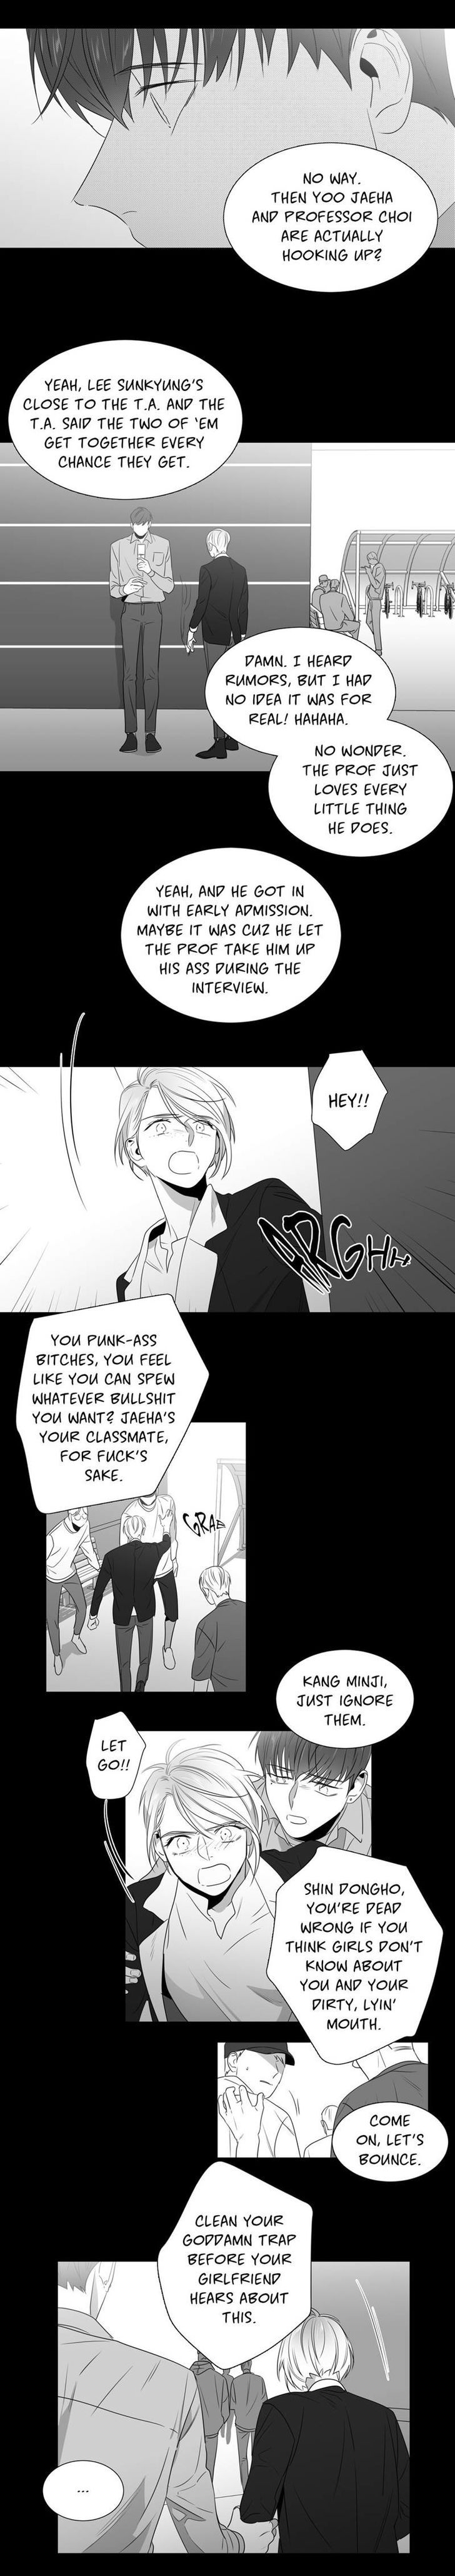 Lover Boy (Lezhin) Chapter 047.2 page 5